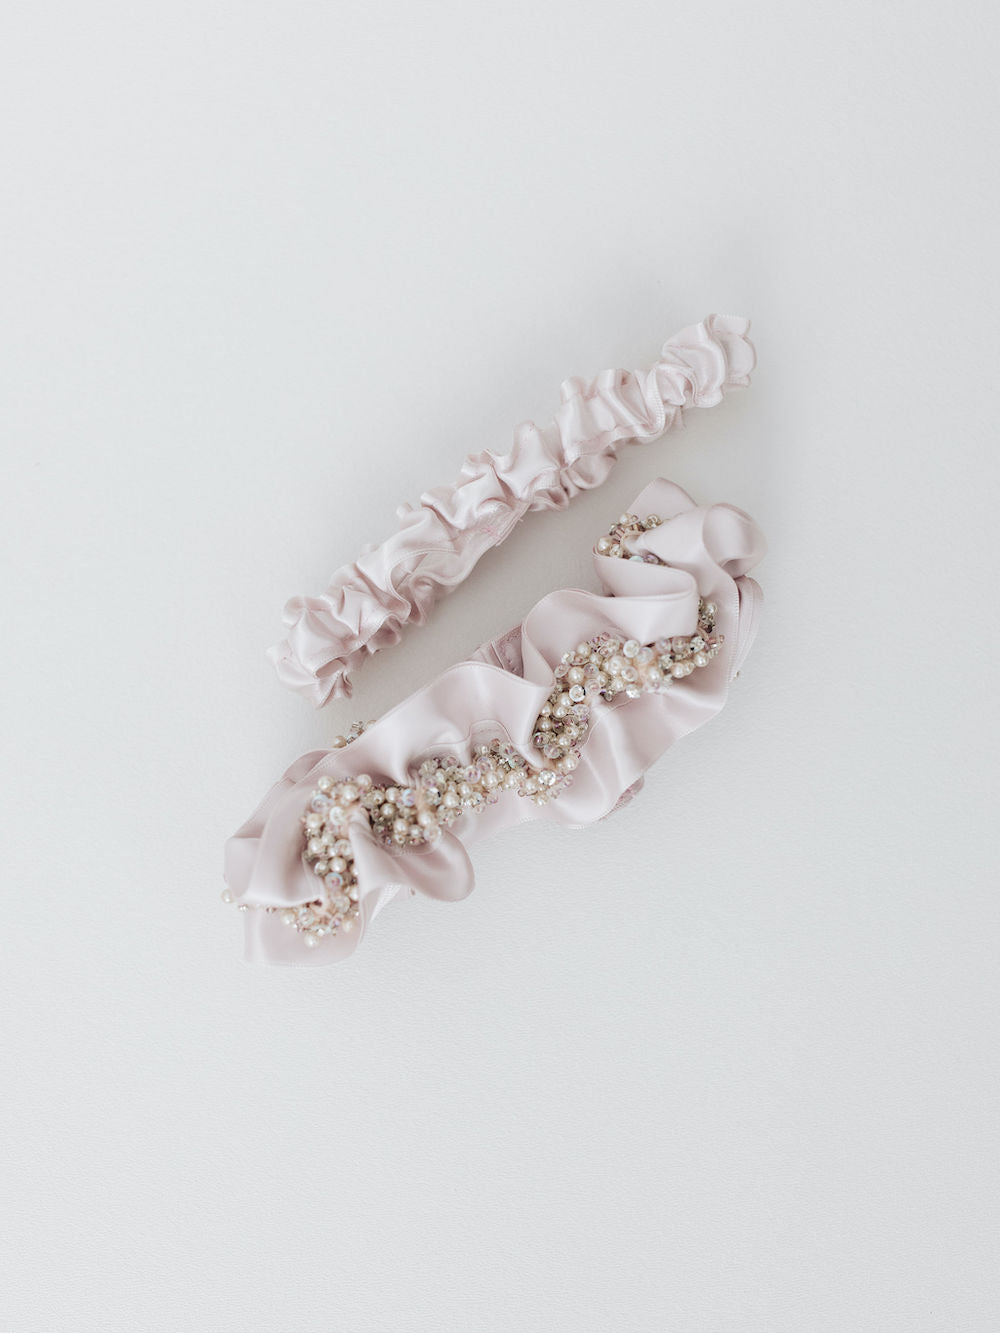 blush satin & sparkle beaded wedding garter set personalized with hand embroidery by expert bridal accessories designer, The Garter Girl